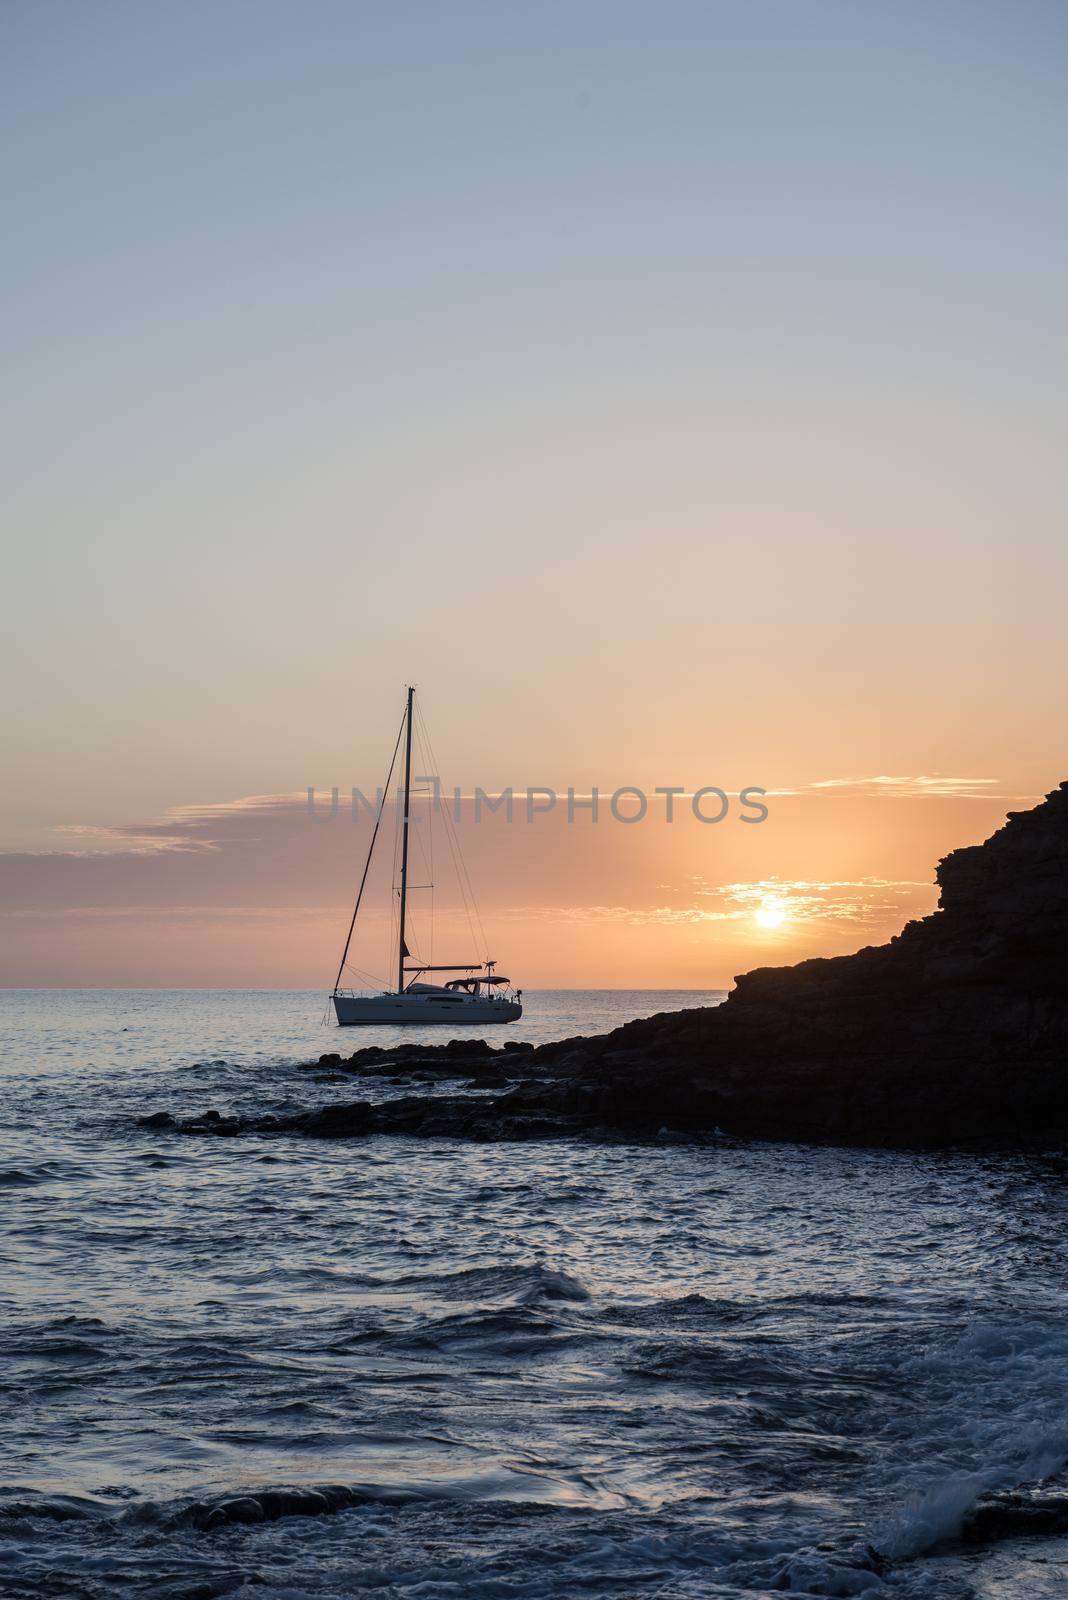 Boat at sunset in the Atlantic Sea on the Island of Fuerteventura in Spain.